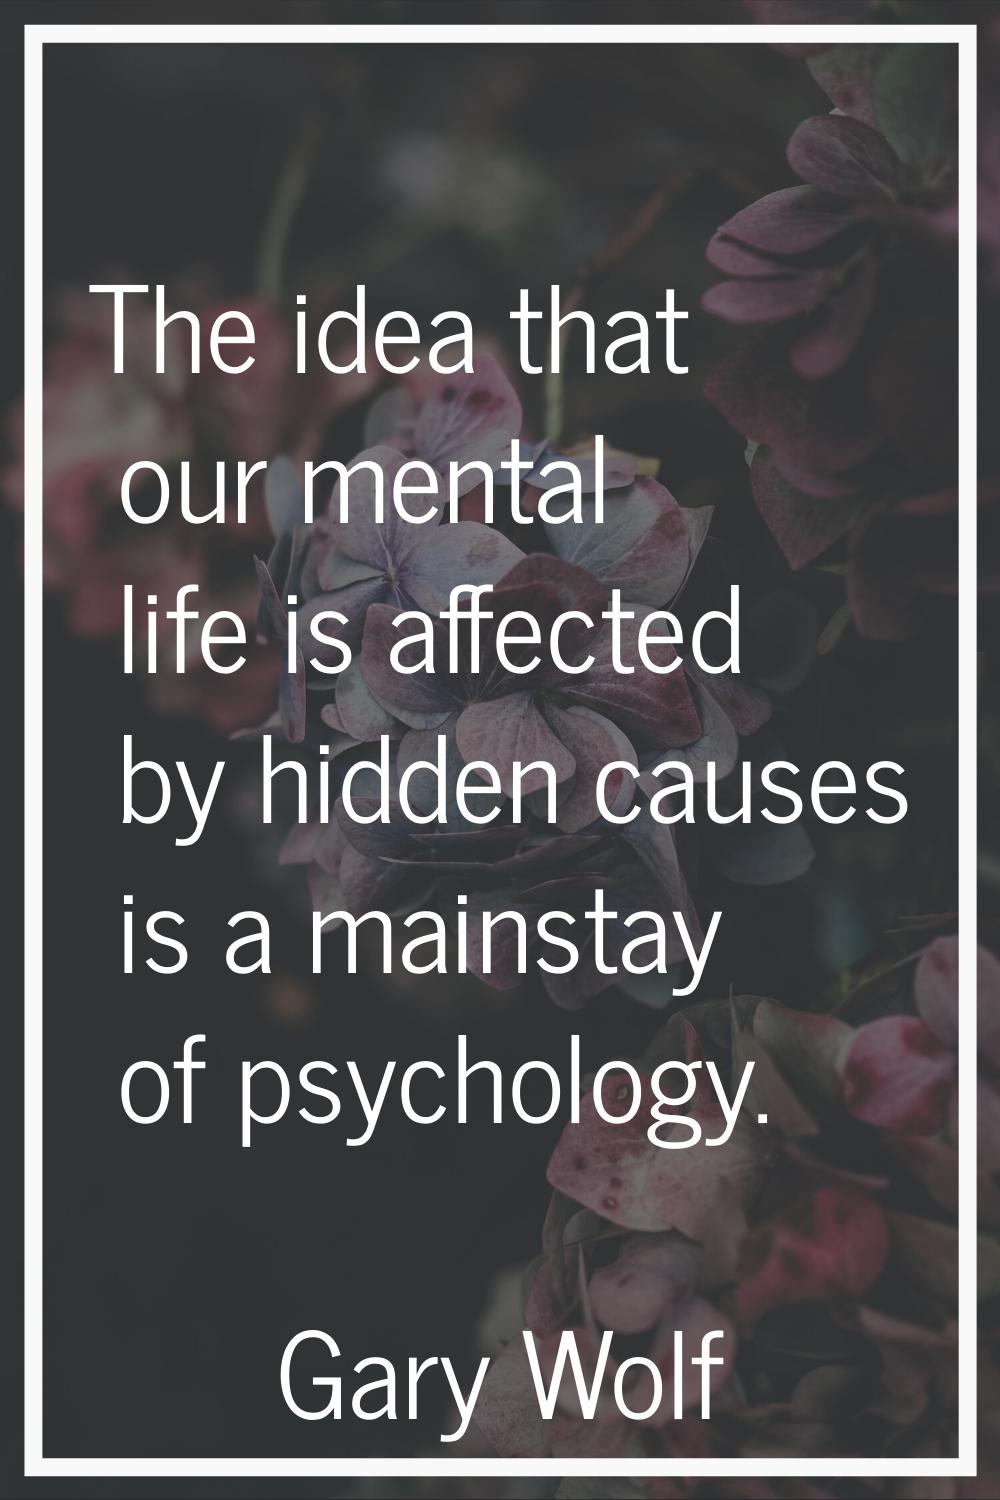 The idea that our mental life is affected by hidden causes is a mainstay of psychology.